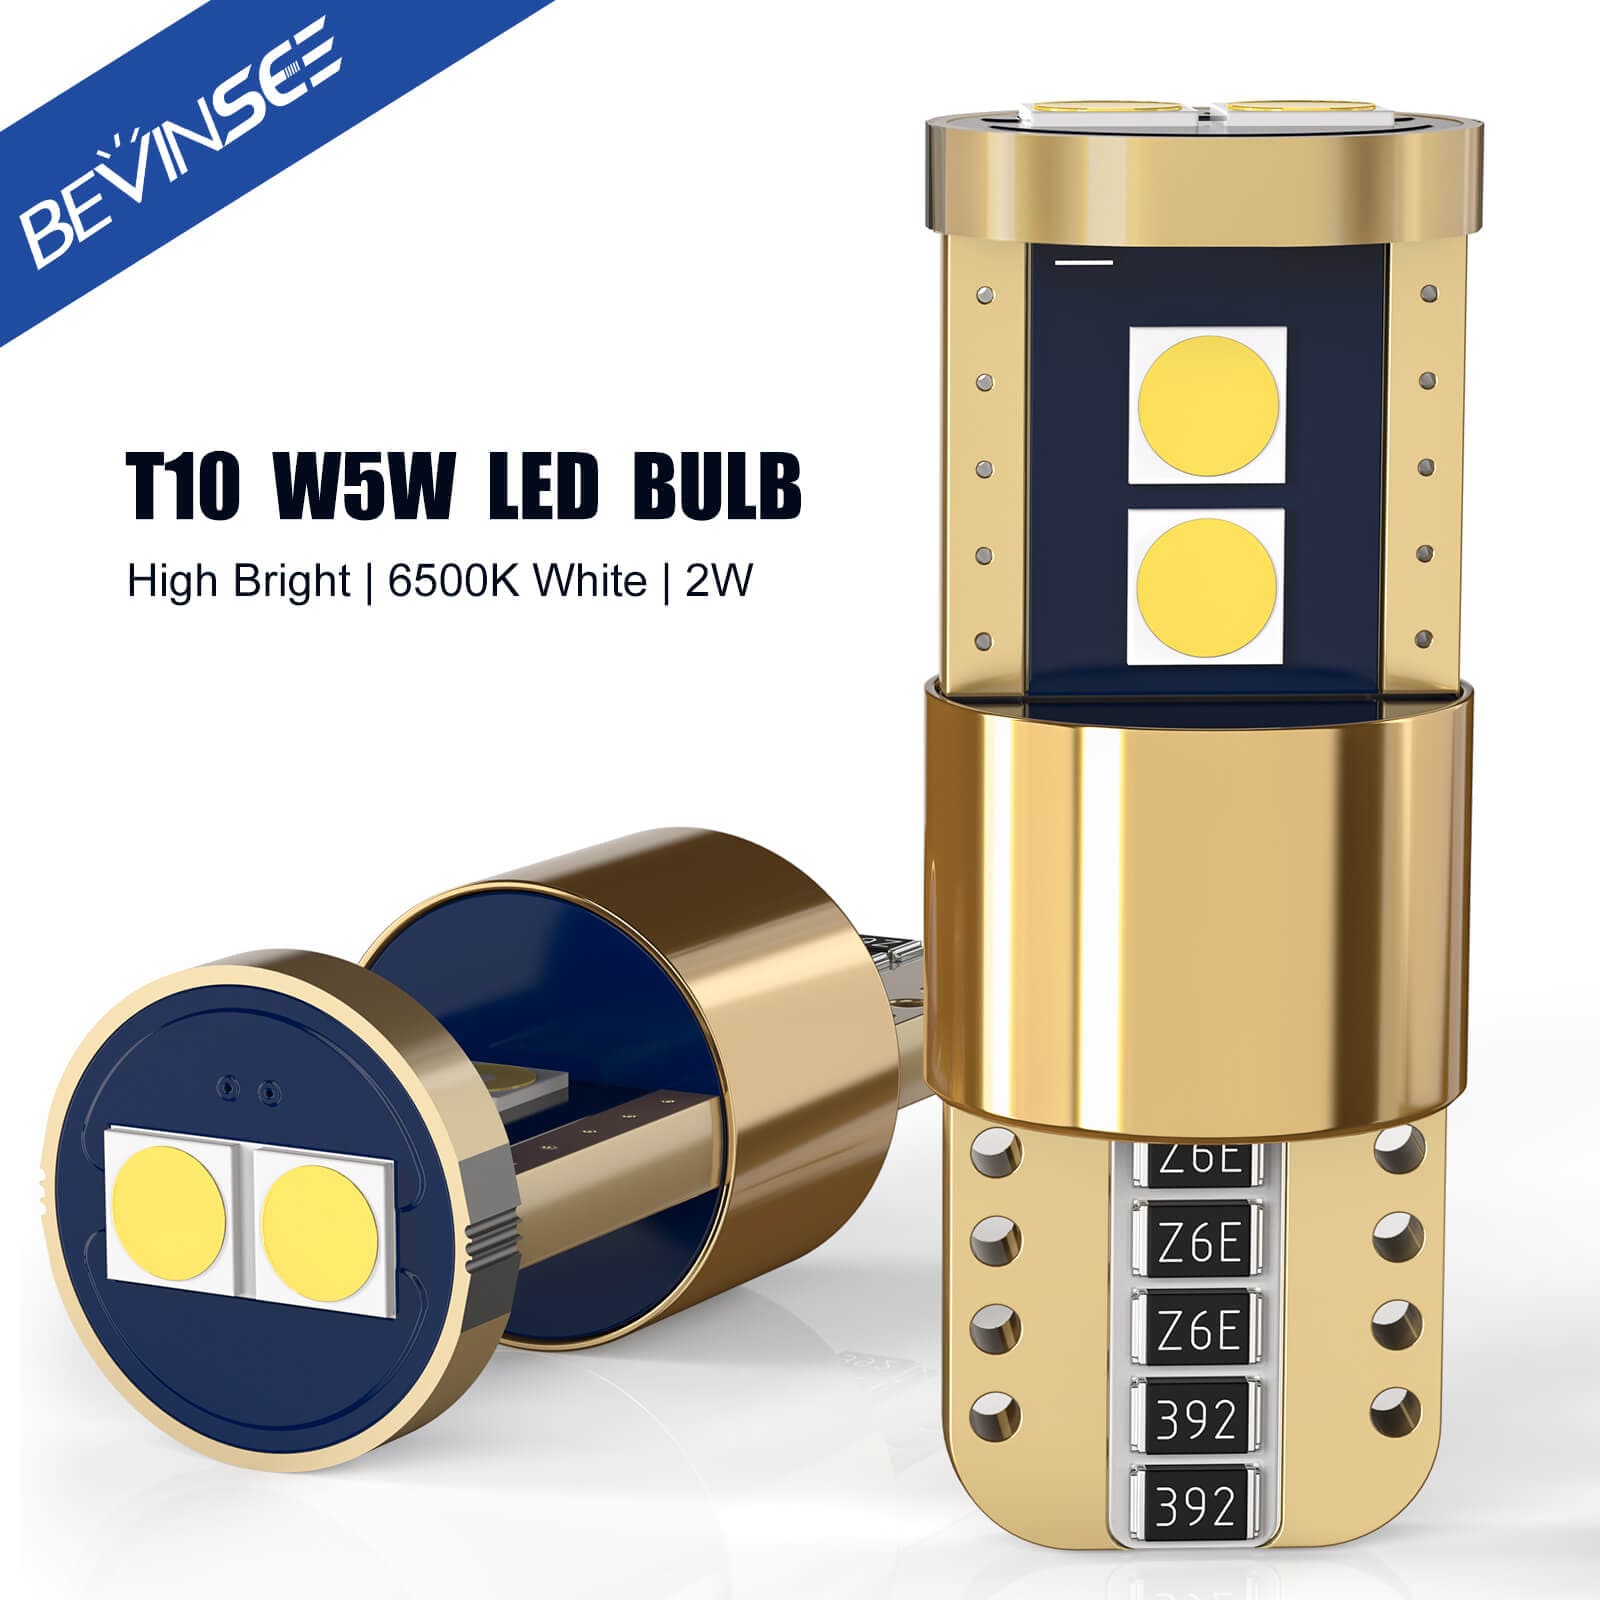 BEVINSEE T10 W5W 194 168 LED Bulbs White Beam 6500K Interior Car Lights Replacement